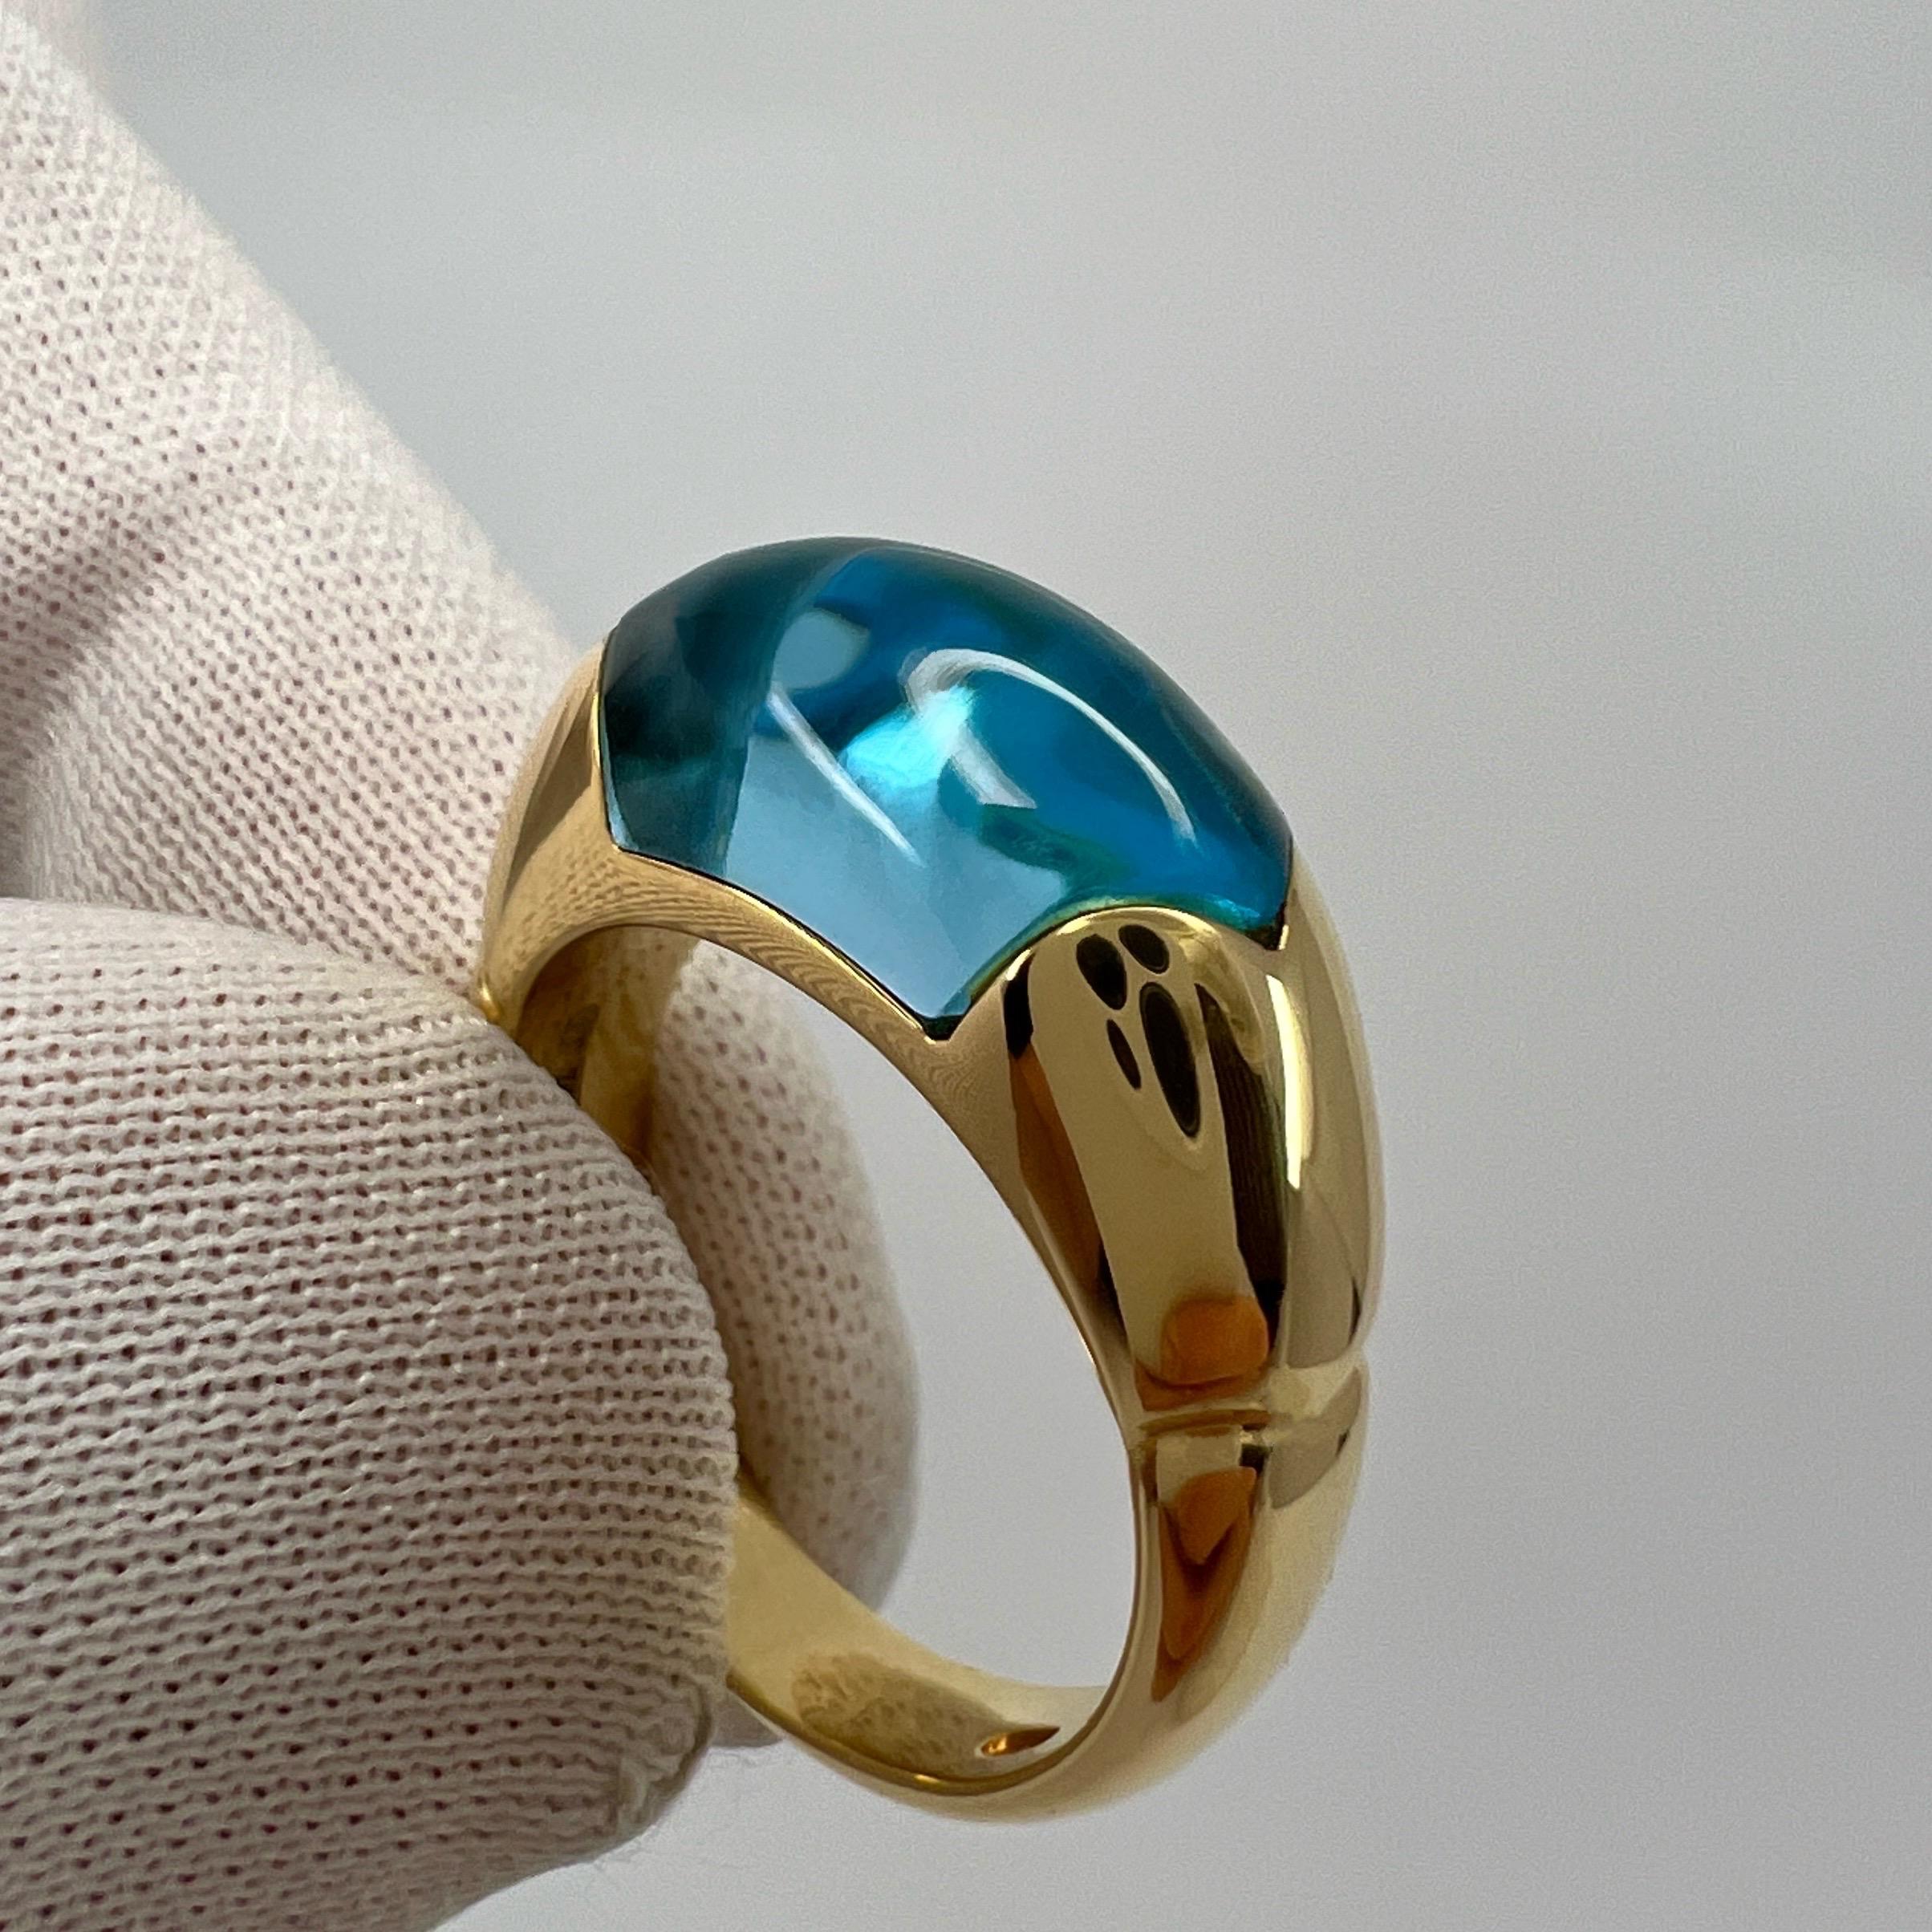 Rare Vintage Bvlgari Certica 18k Yellow Gold Blue Topaz Dome Ring with Box 2